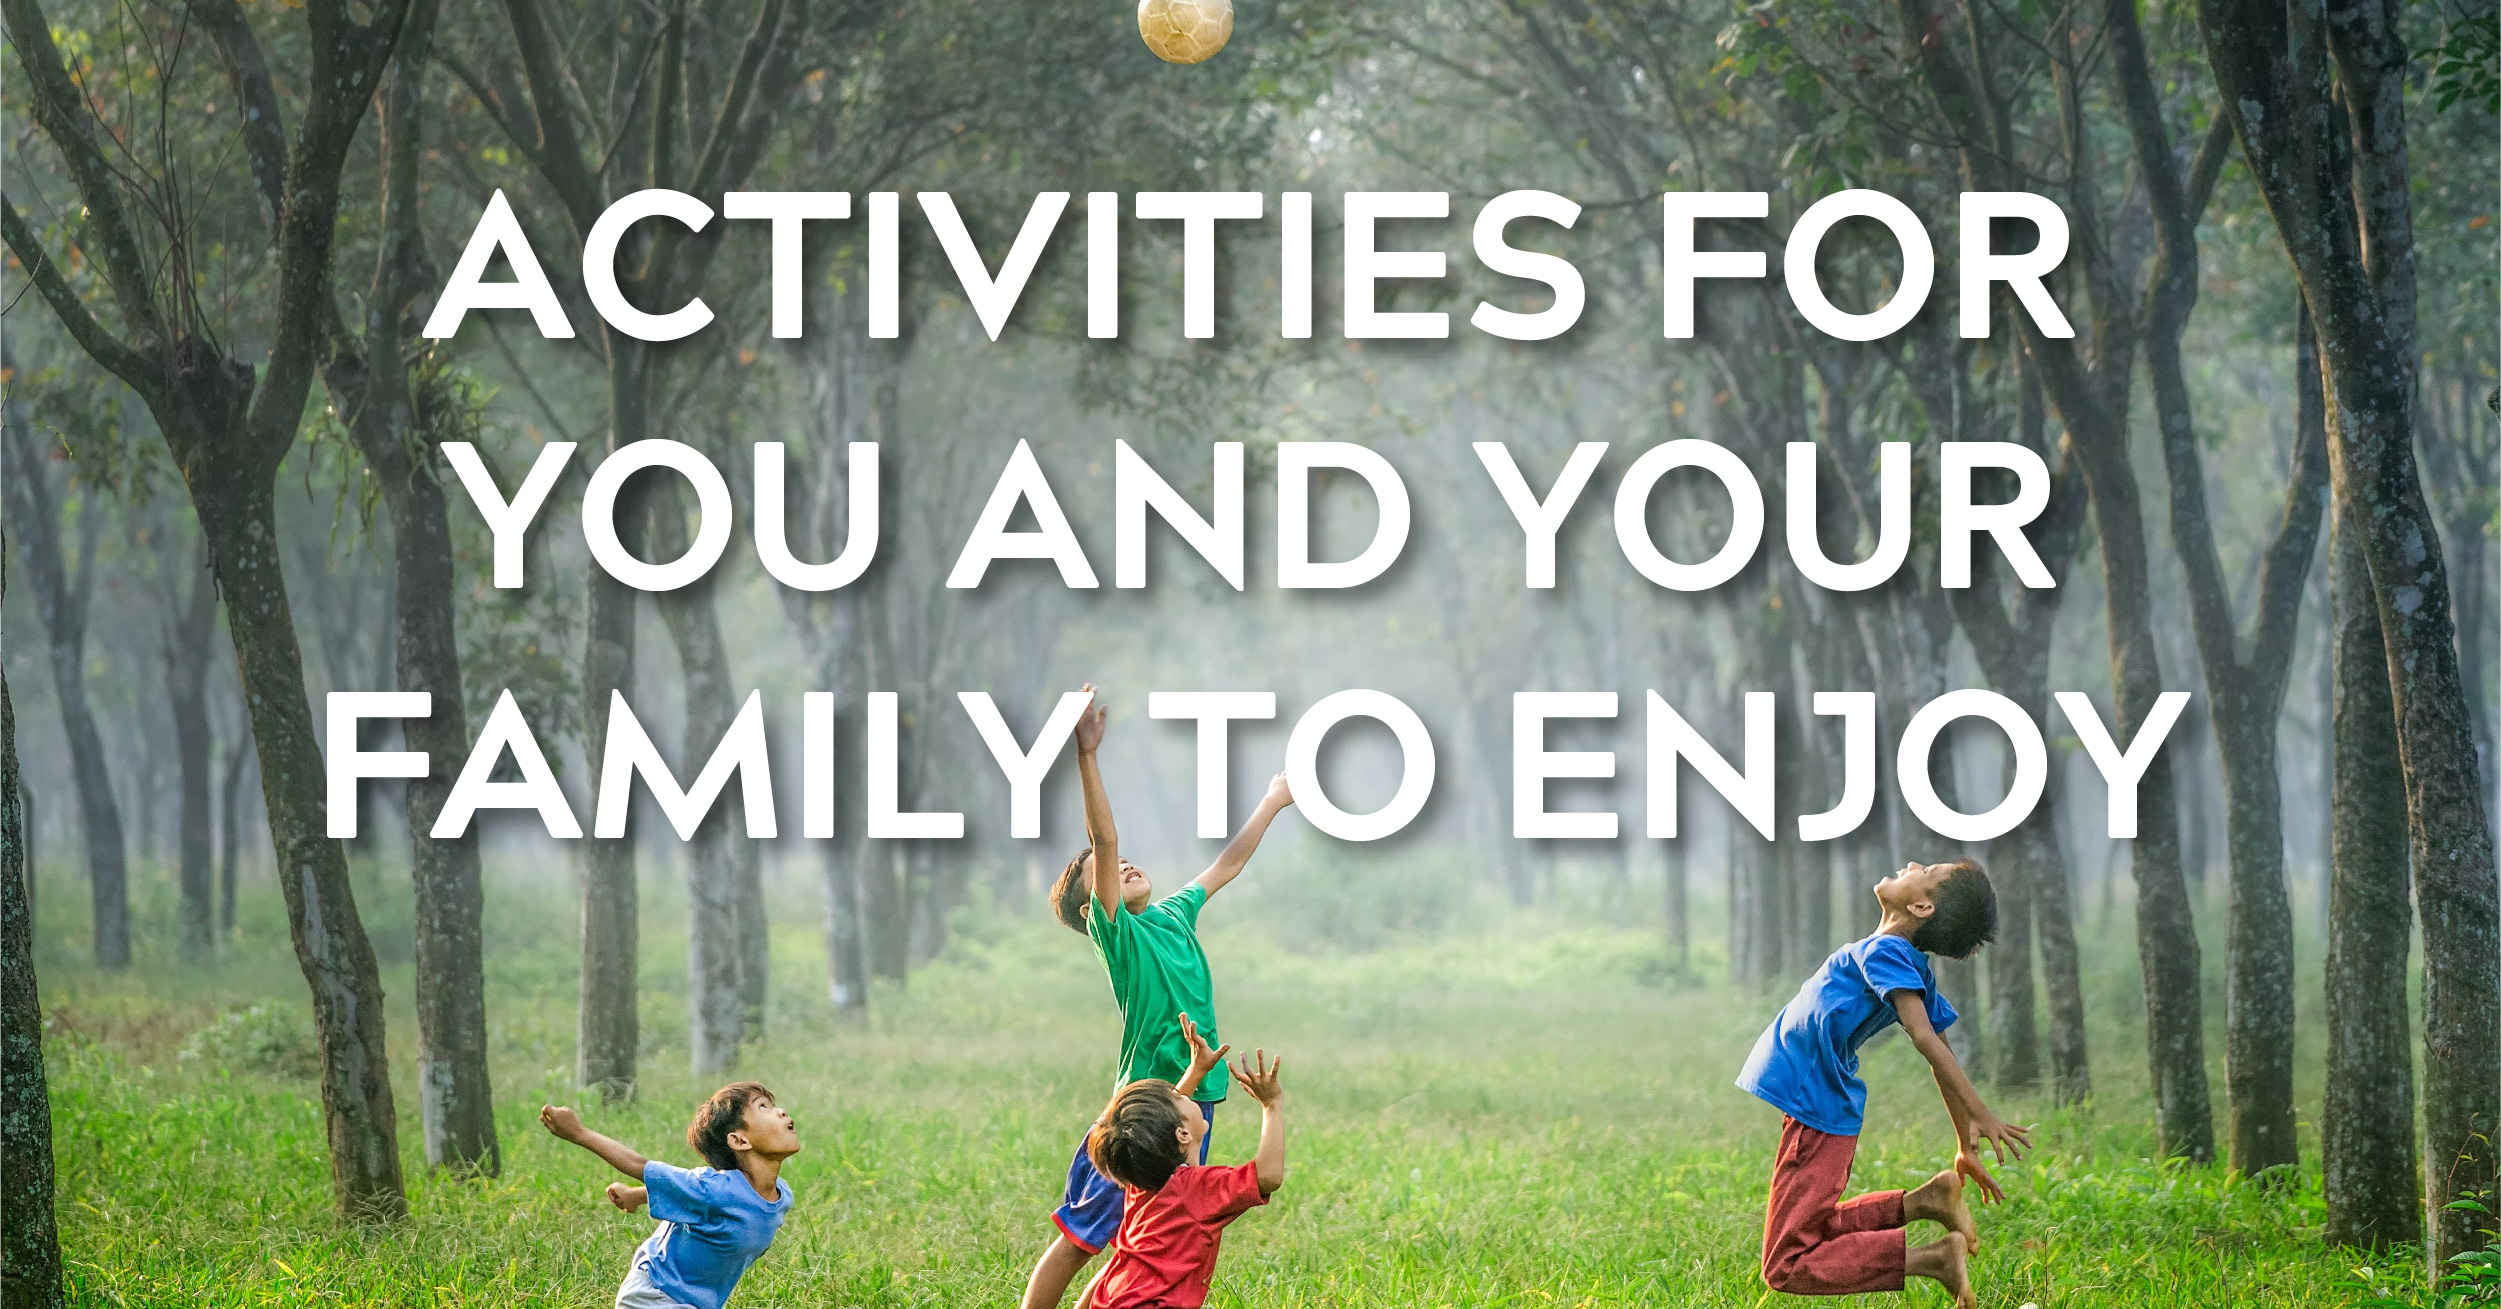 Activities for You and Your Family to Enjoy